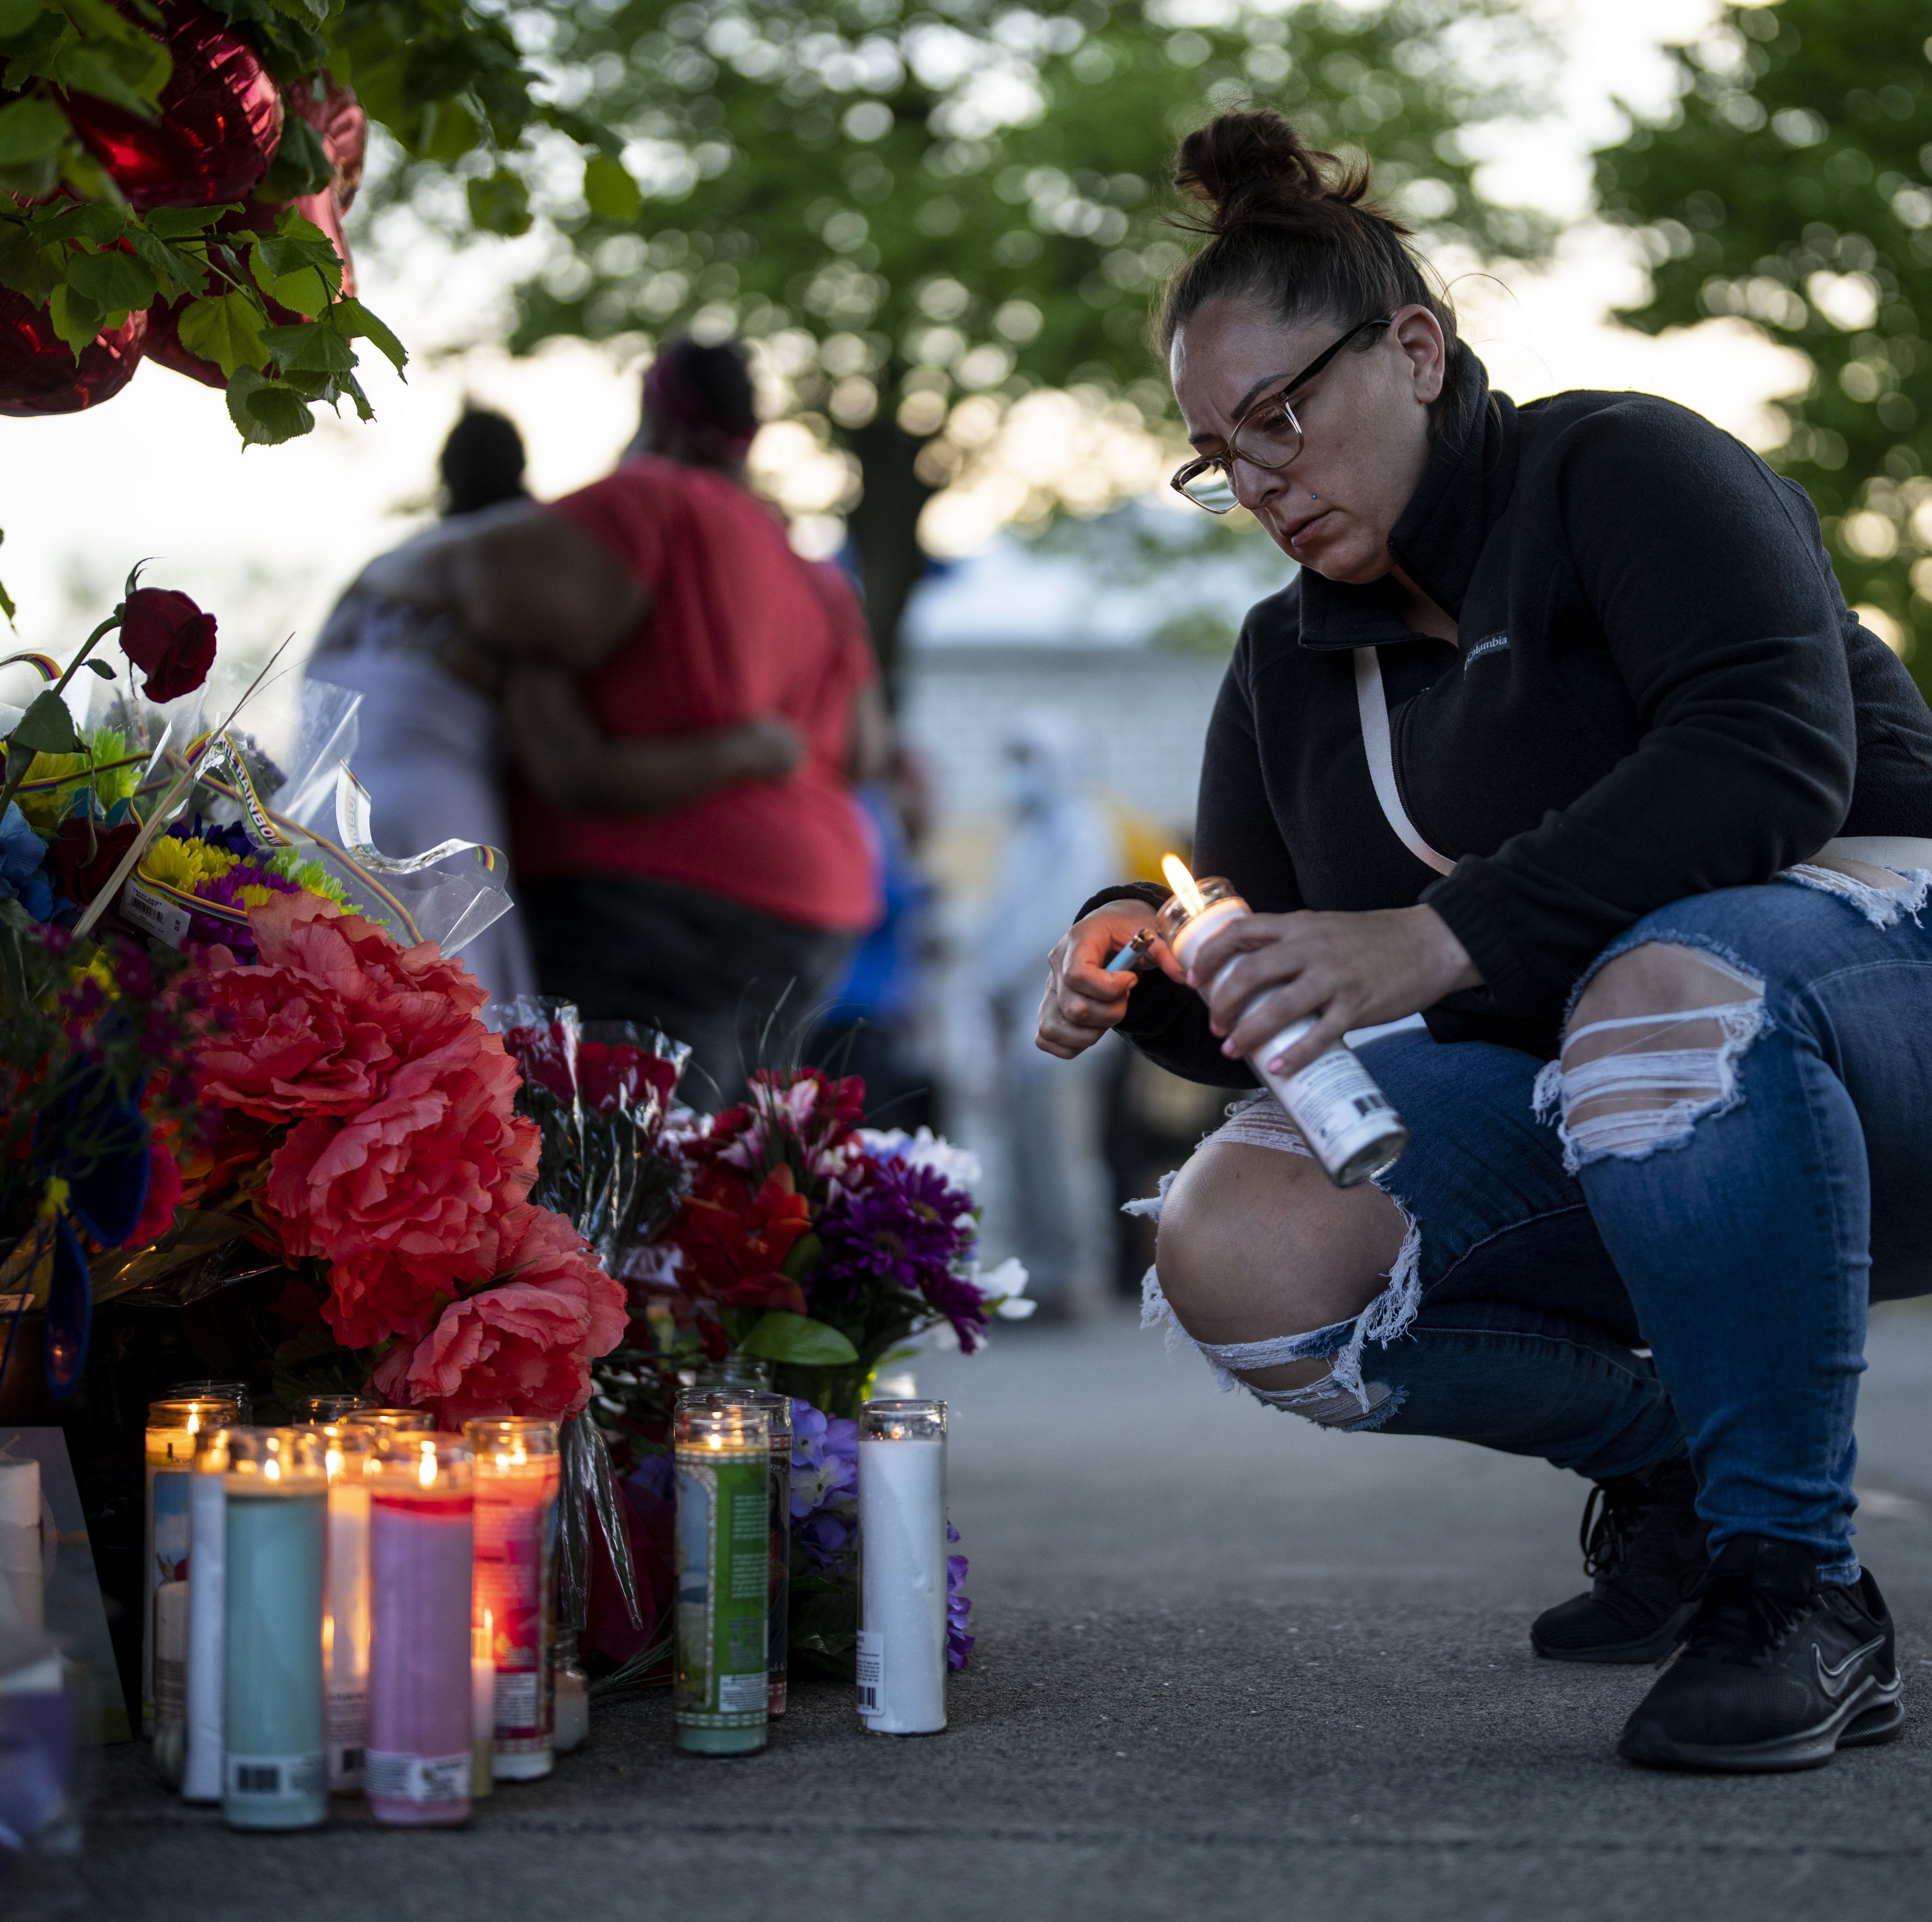 6 Ways to Help Buffalo Shooting Victims and the Surrounding Community